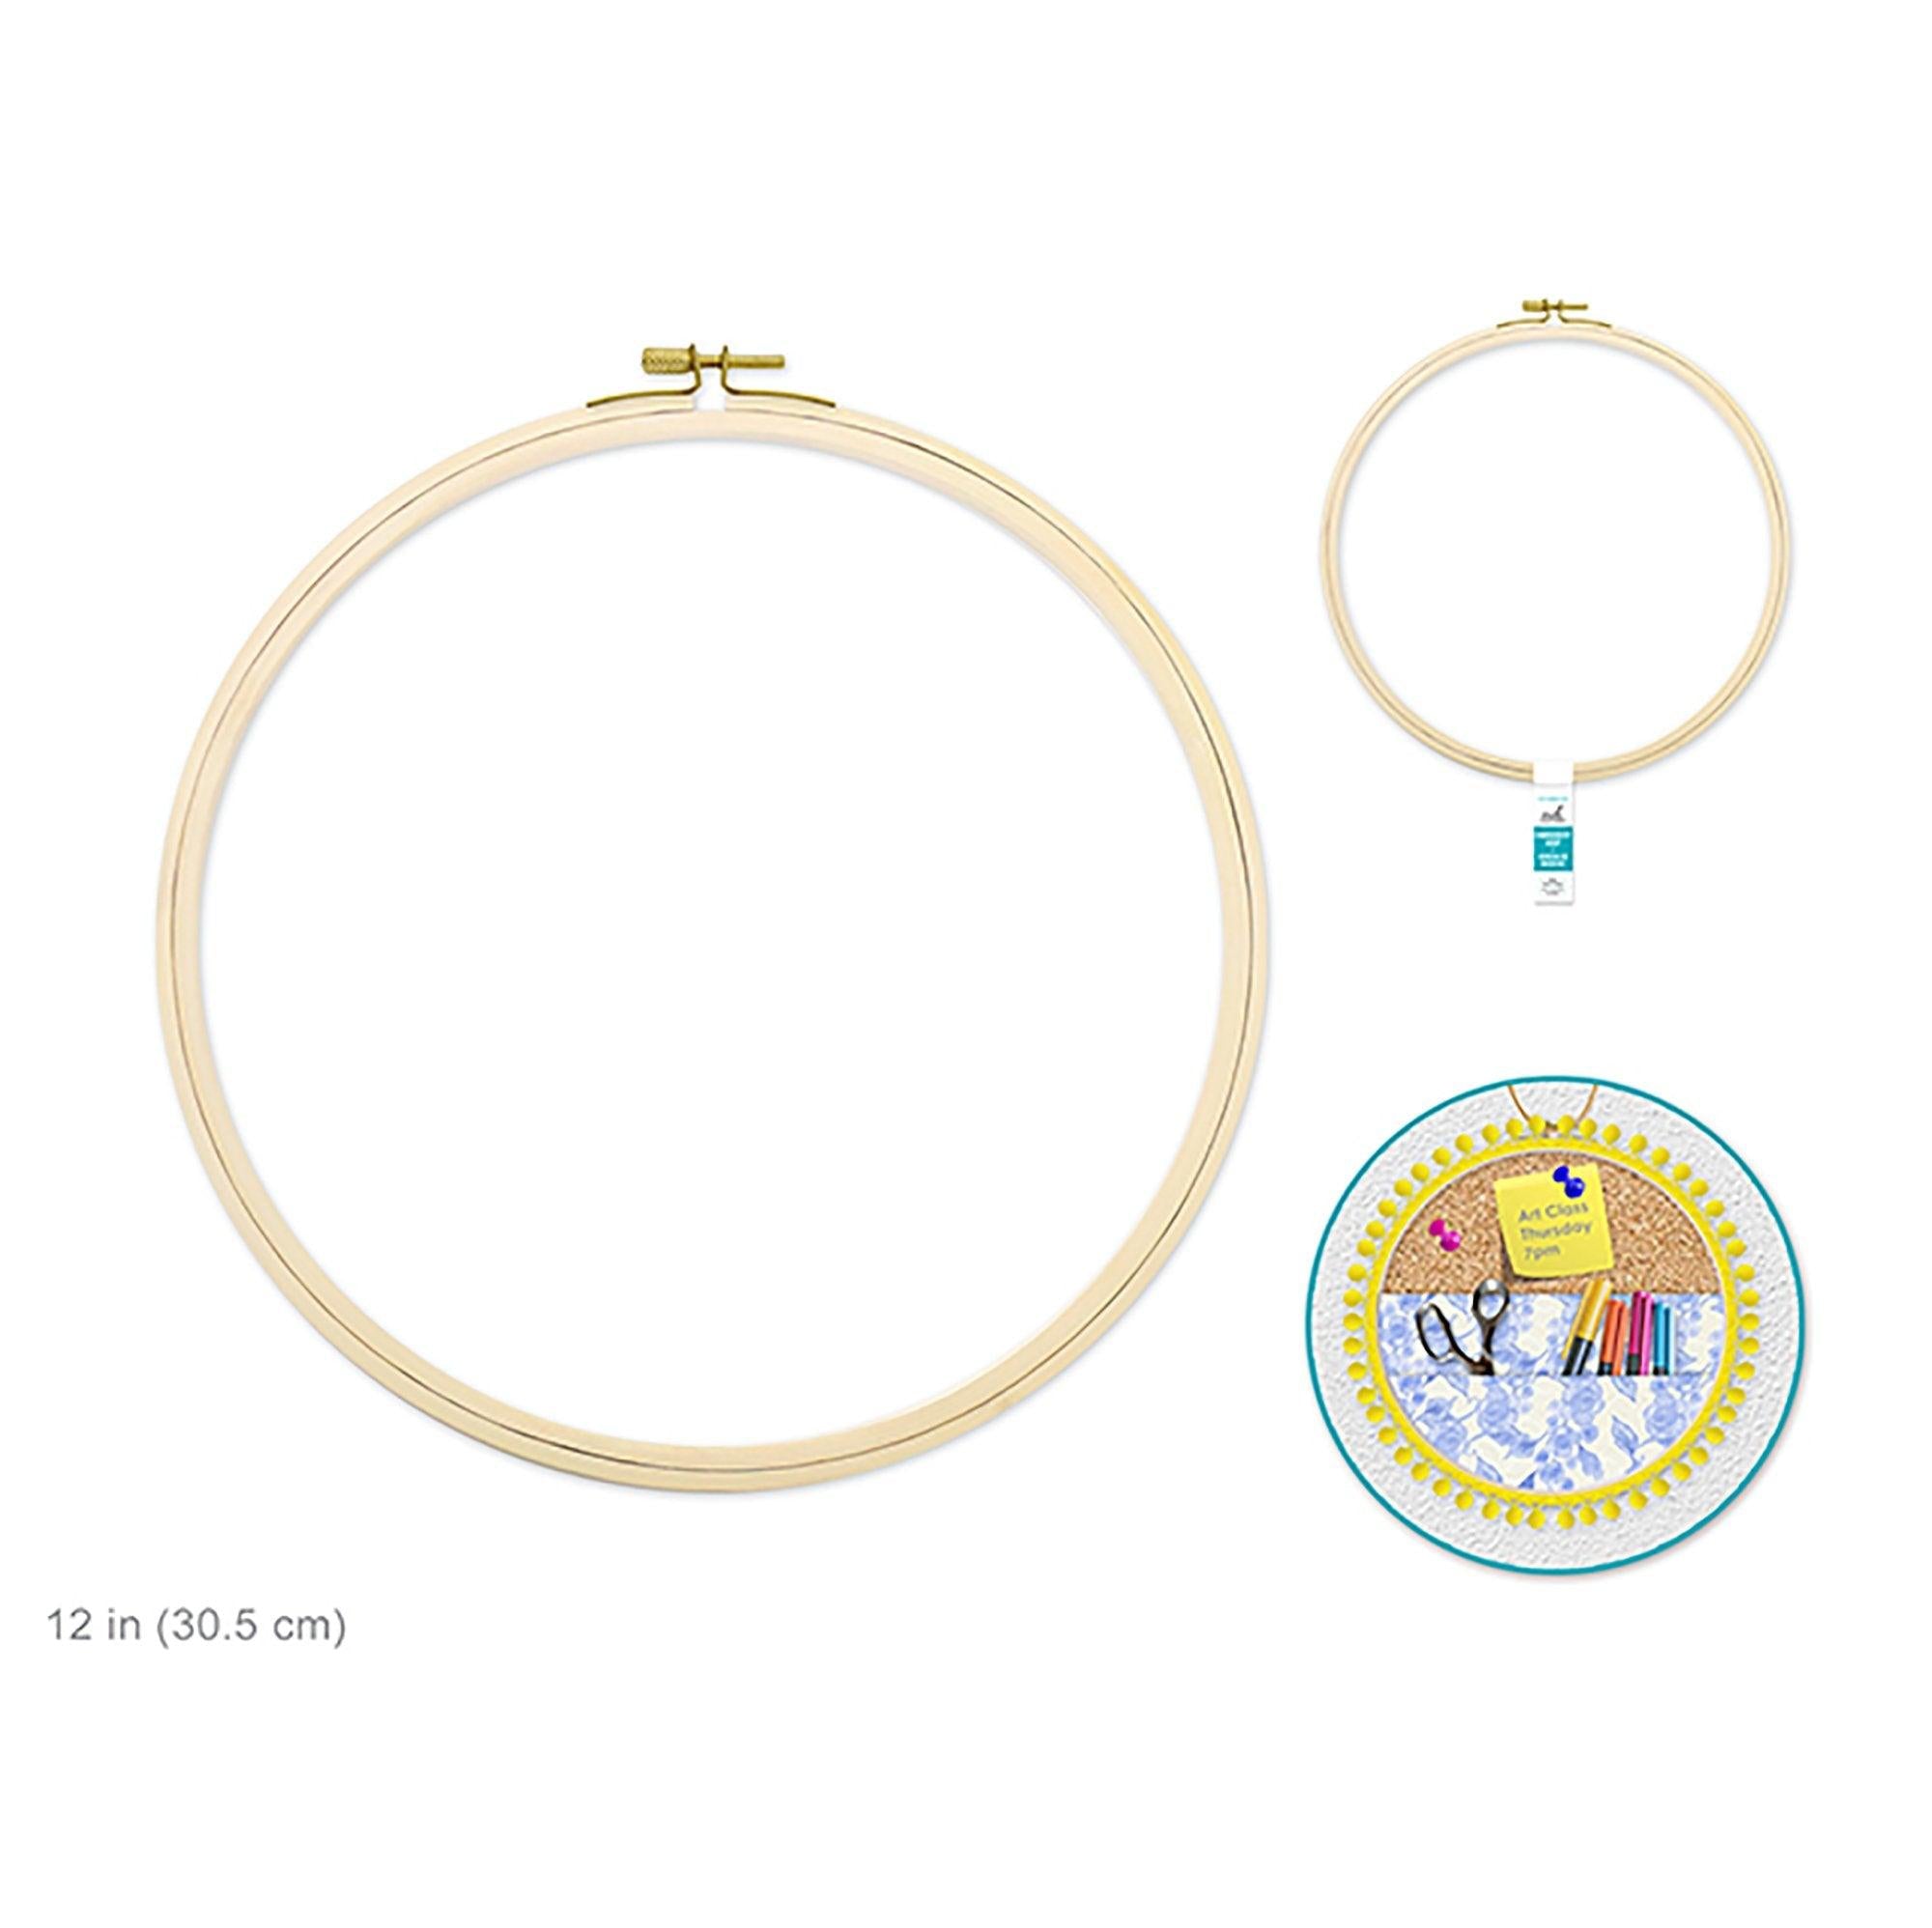 Needlecrafters: 12 inch Embroidery Hoop w/Brass Clamp - Dollar Max Depot